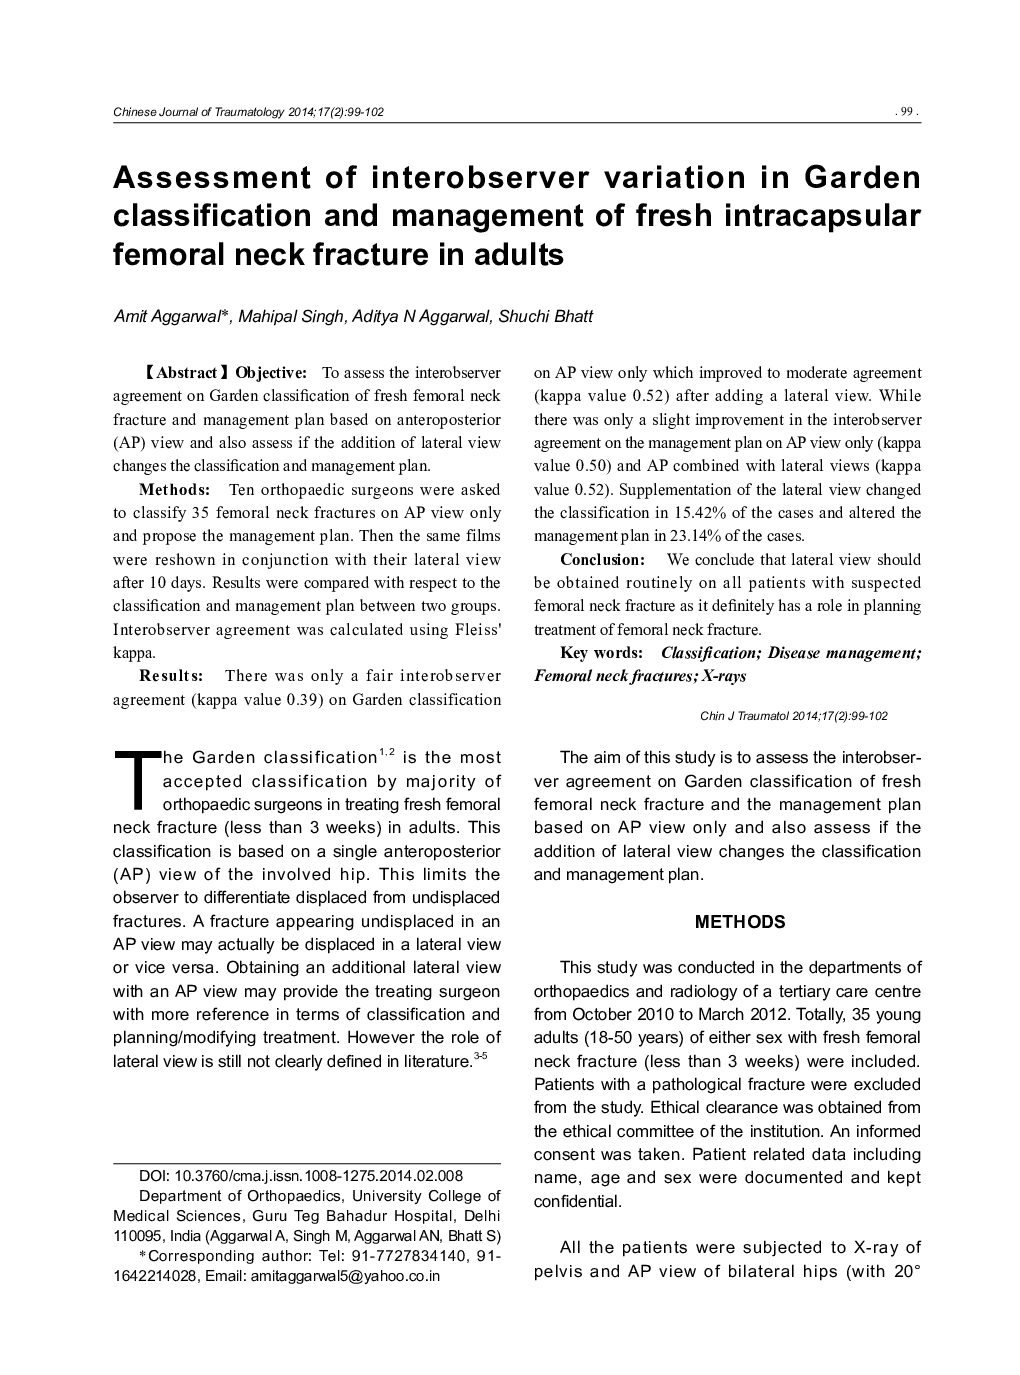 Assessment of interobserver variation in Garden classification and management of fresh intracapsular femoral neck fracture in adults